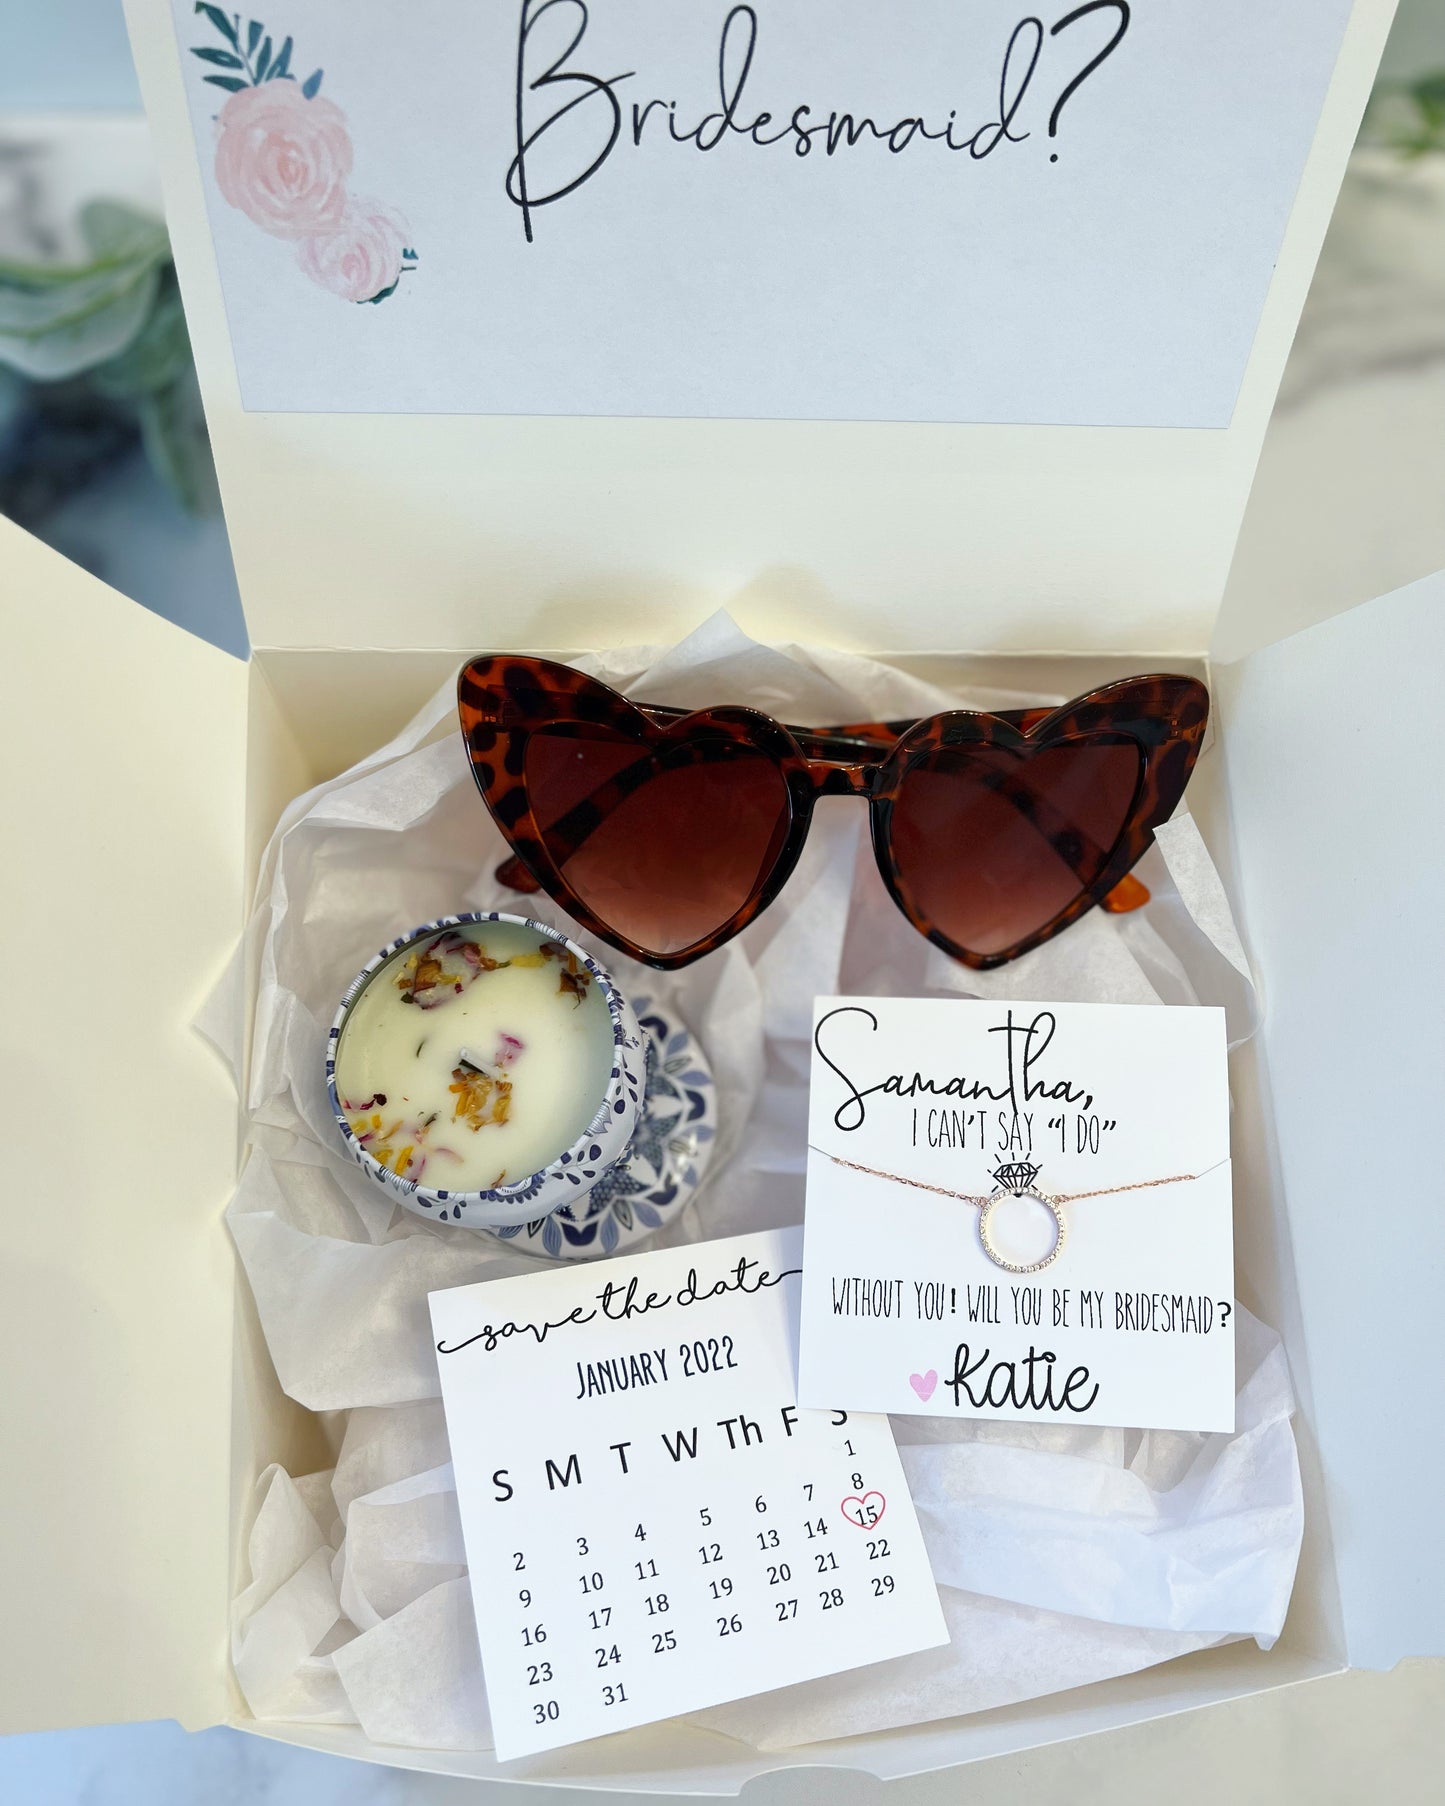 Bridesmaid Proposal Box with Save the Date Card